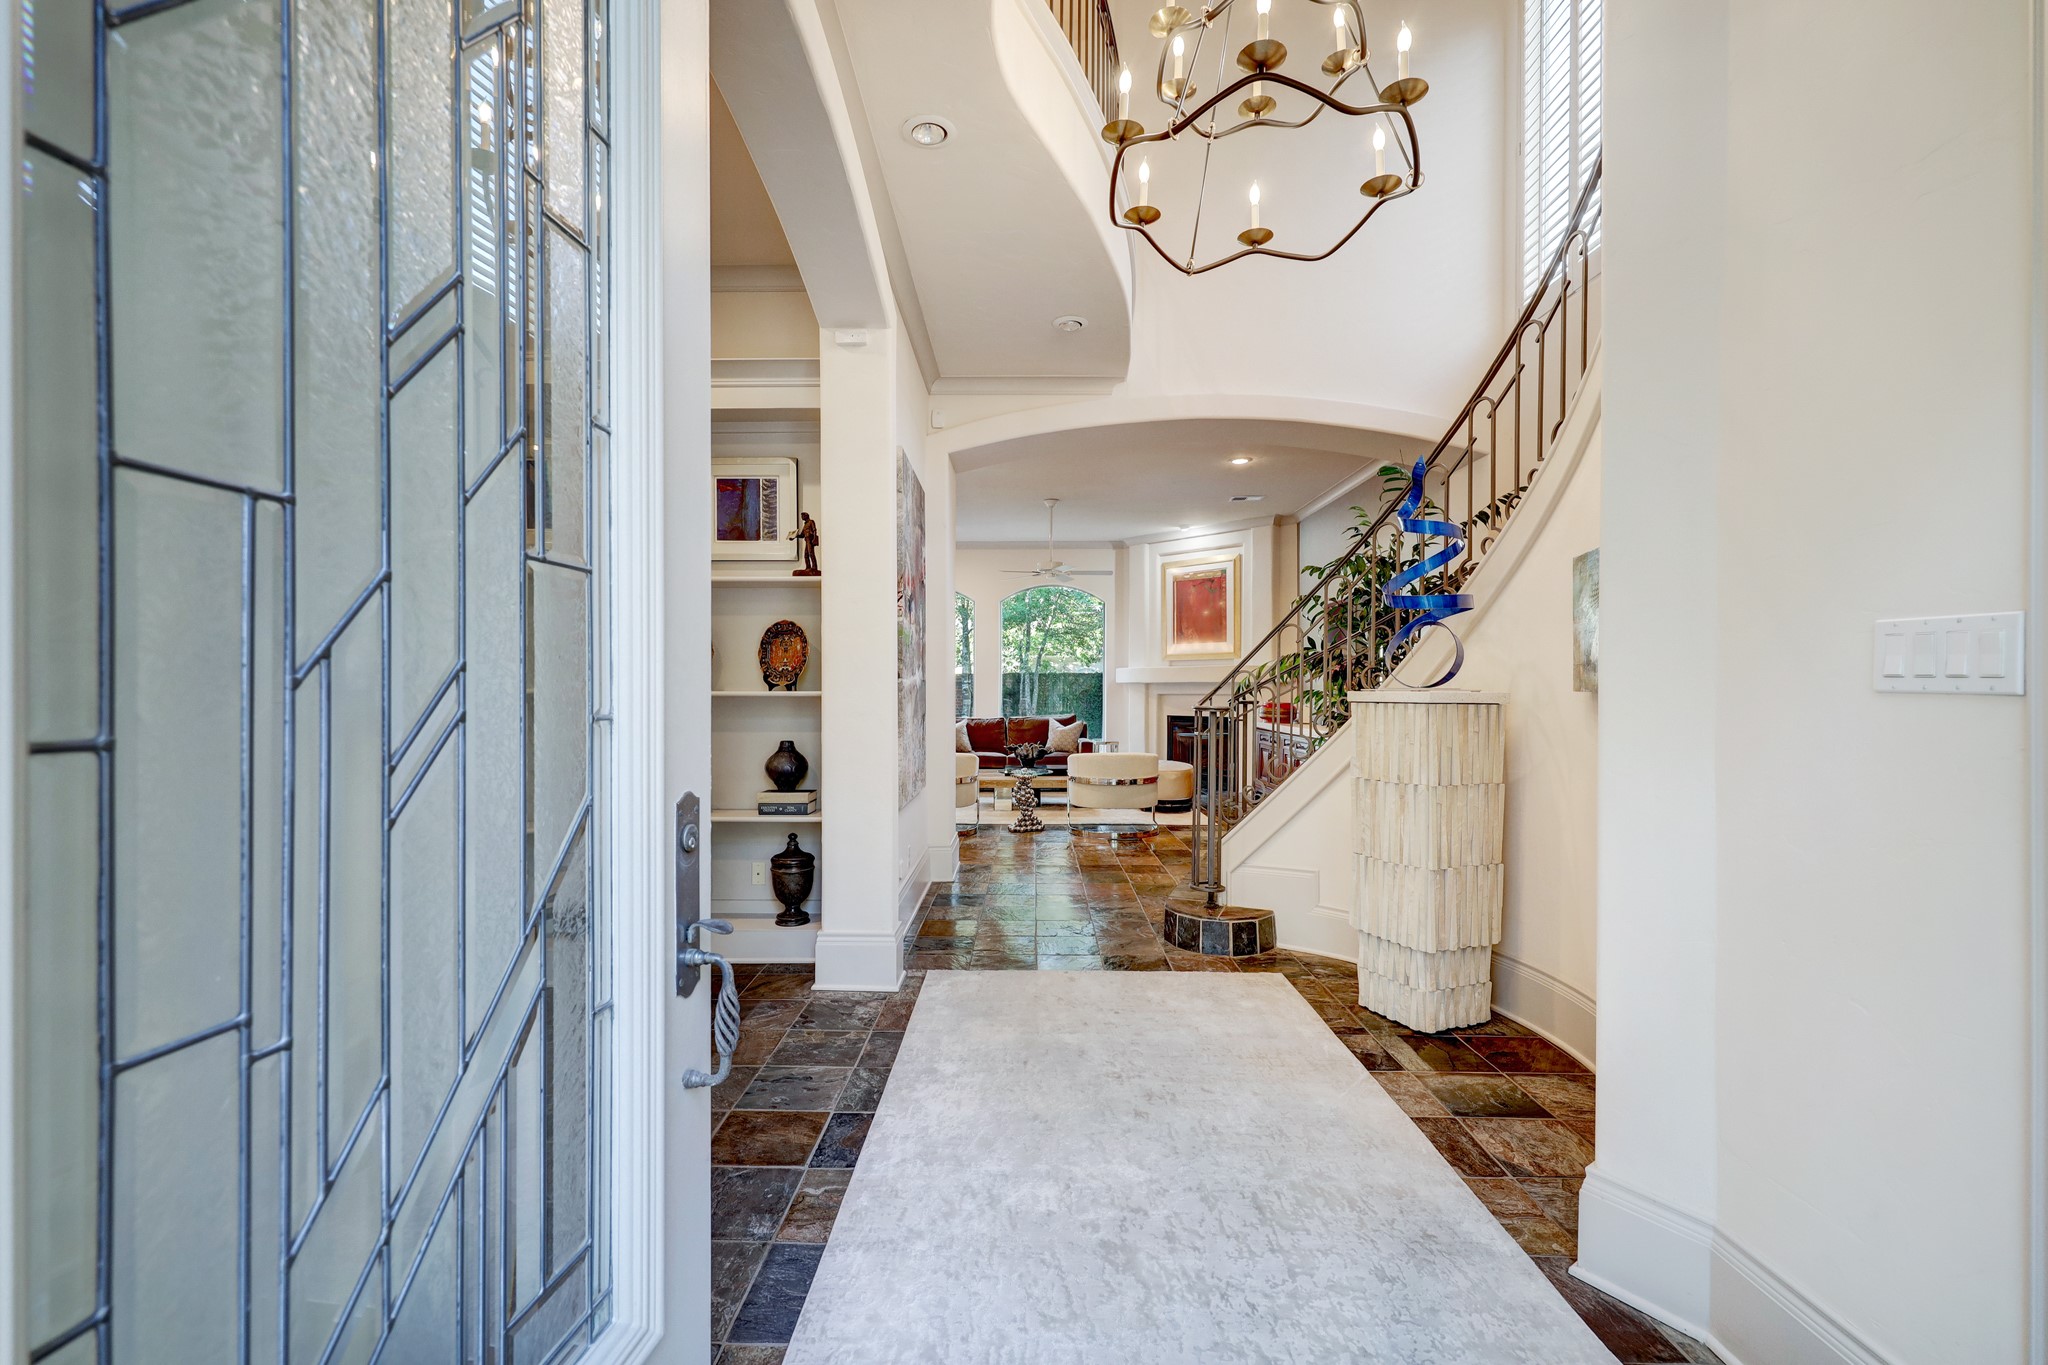 Grand entry foyer with soaring ceilings and elegant architectural details, setting the tone for the luxurious and welcoming interior of the home.